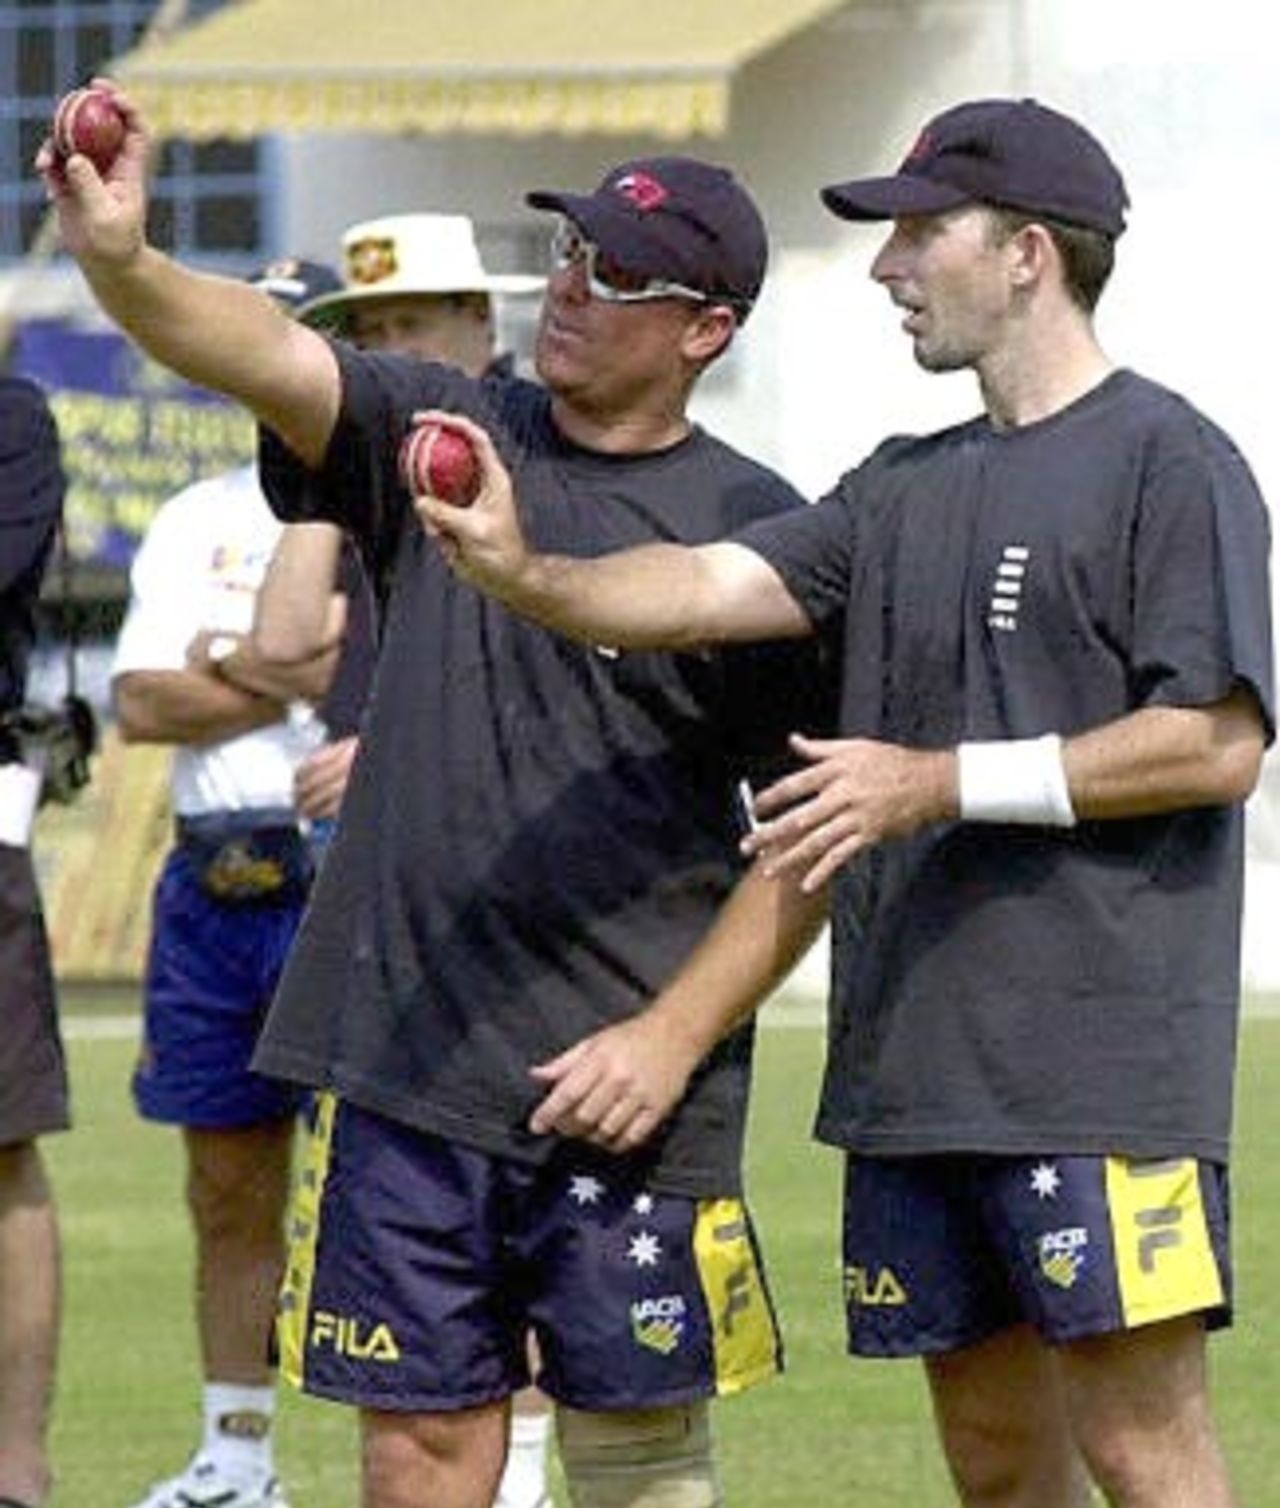 Australian fast bowler D Fleming (R) and spin bowler Shane Warne look at balls during their net practice session at the Nagpur stadium 16 February 2001. The Australian cricket team will play their first test match against India A, 17 February.